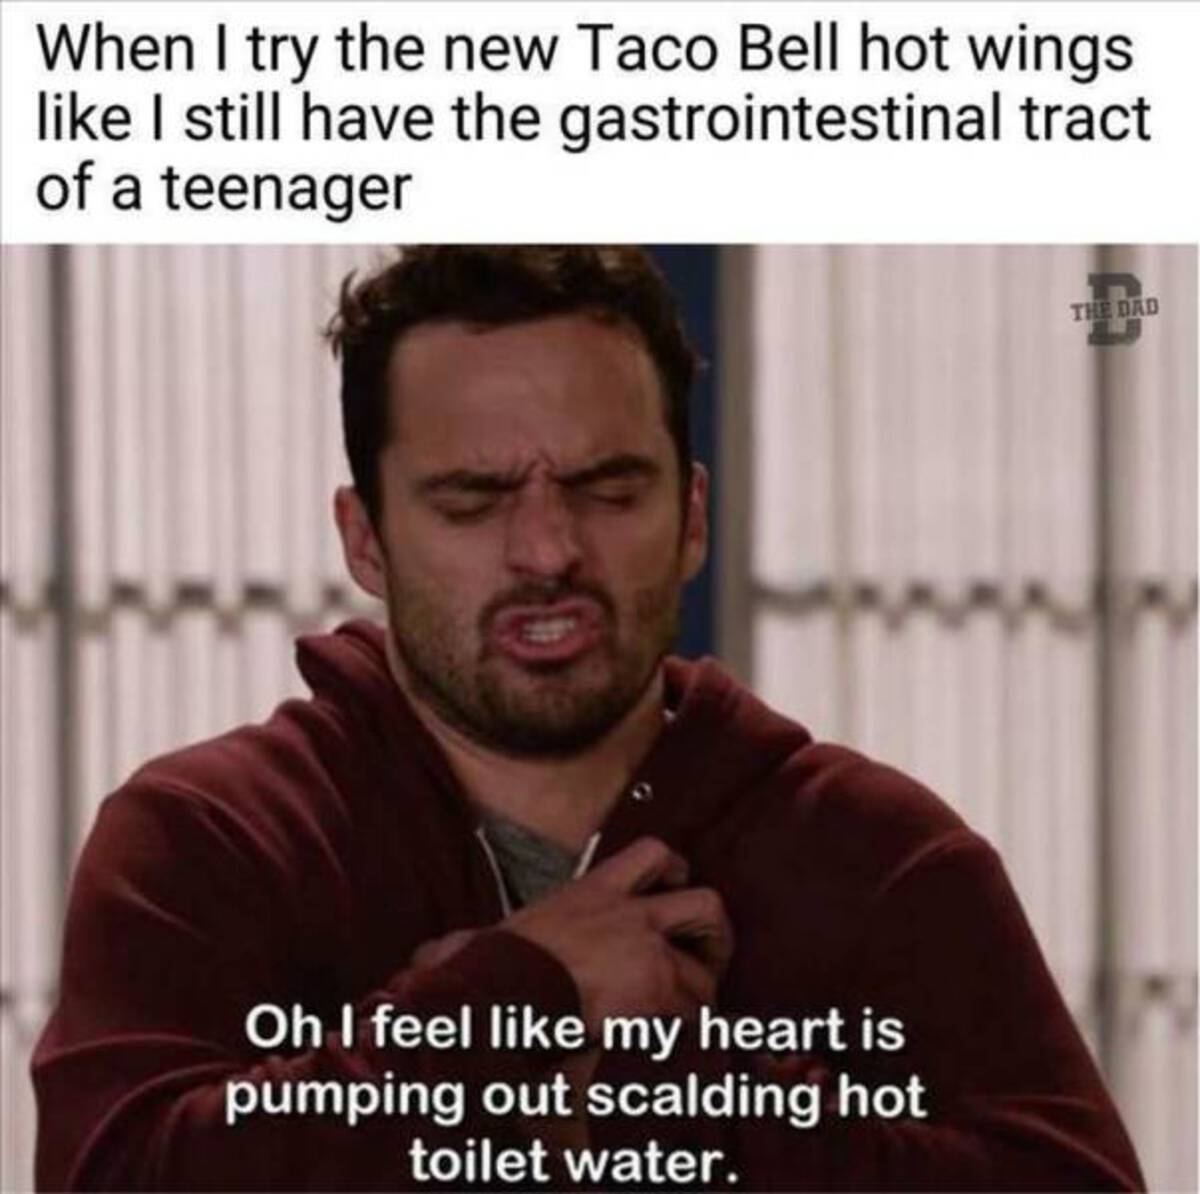 photo caption - When I try the new Taco Bell hot wings I still have the gastrointestinal tract of a teenager Oh I feel my heart is pumping out scalding hot toilet water. The Dad